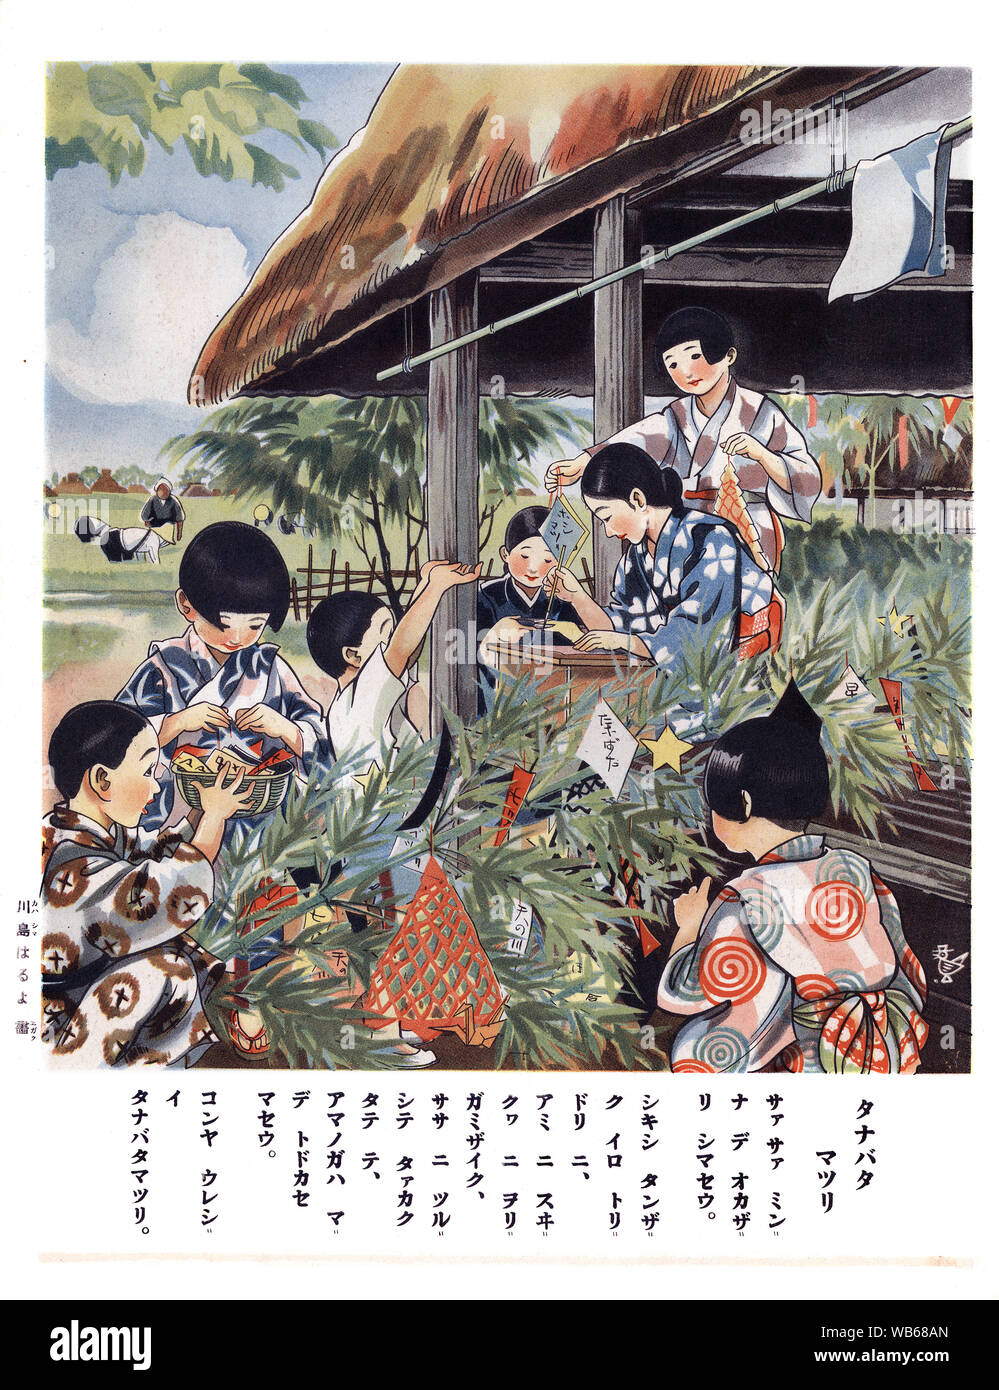 [ 1930s Japan - Illustration of the Japanese Star Festival ] —   A print with verse for elementary school children showing children enjoying the Tanabata star festival.  20th century vintage book illustration. Stock Photo